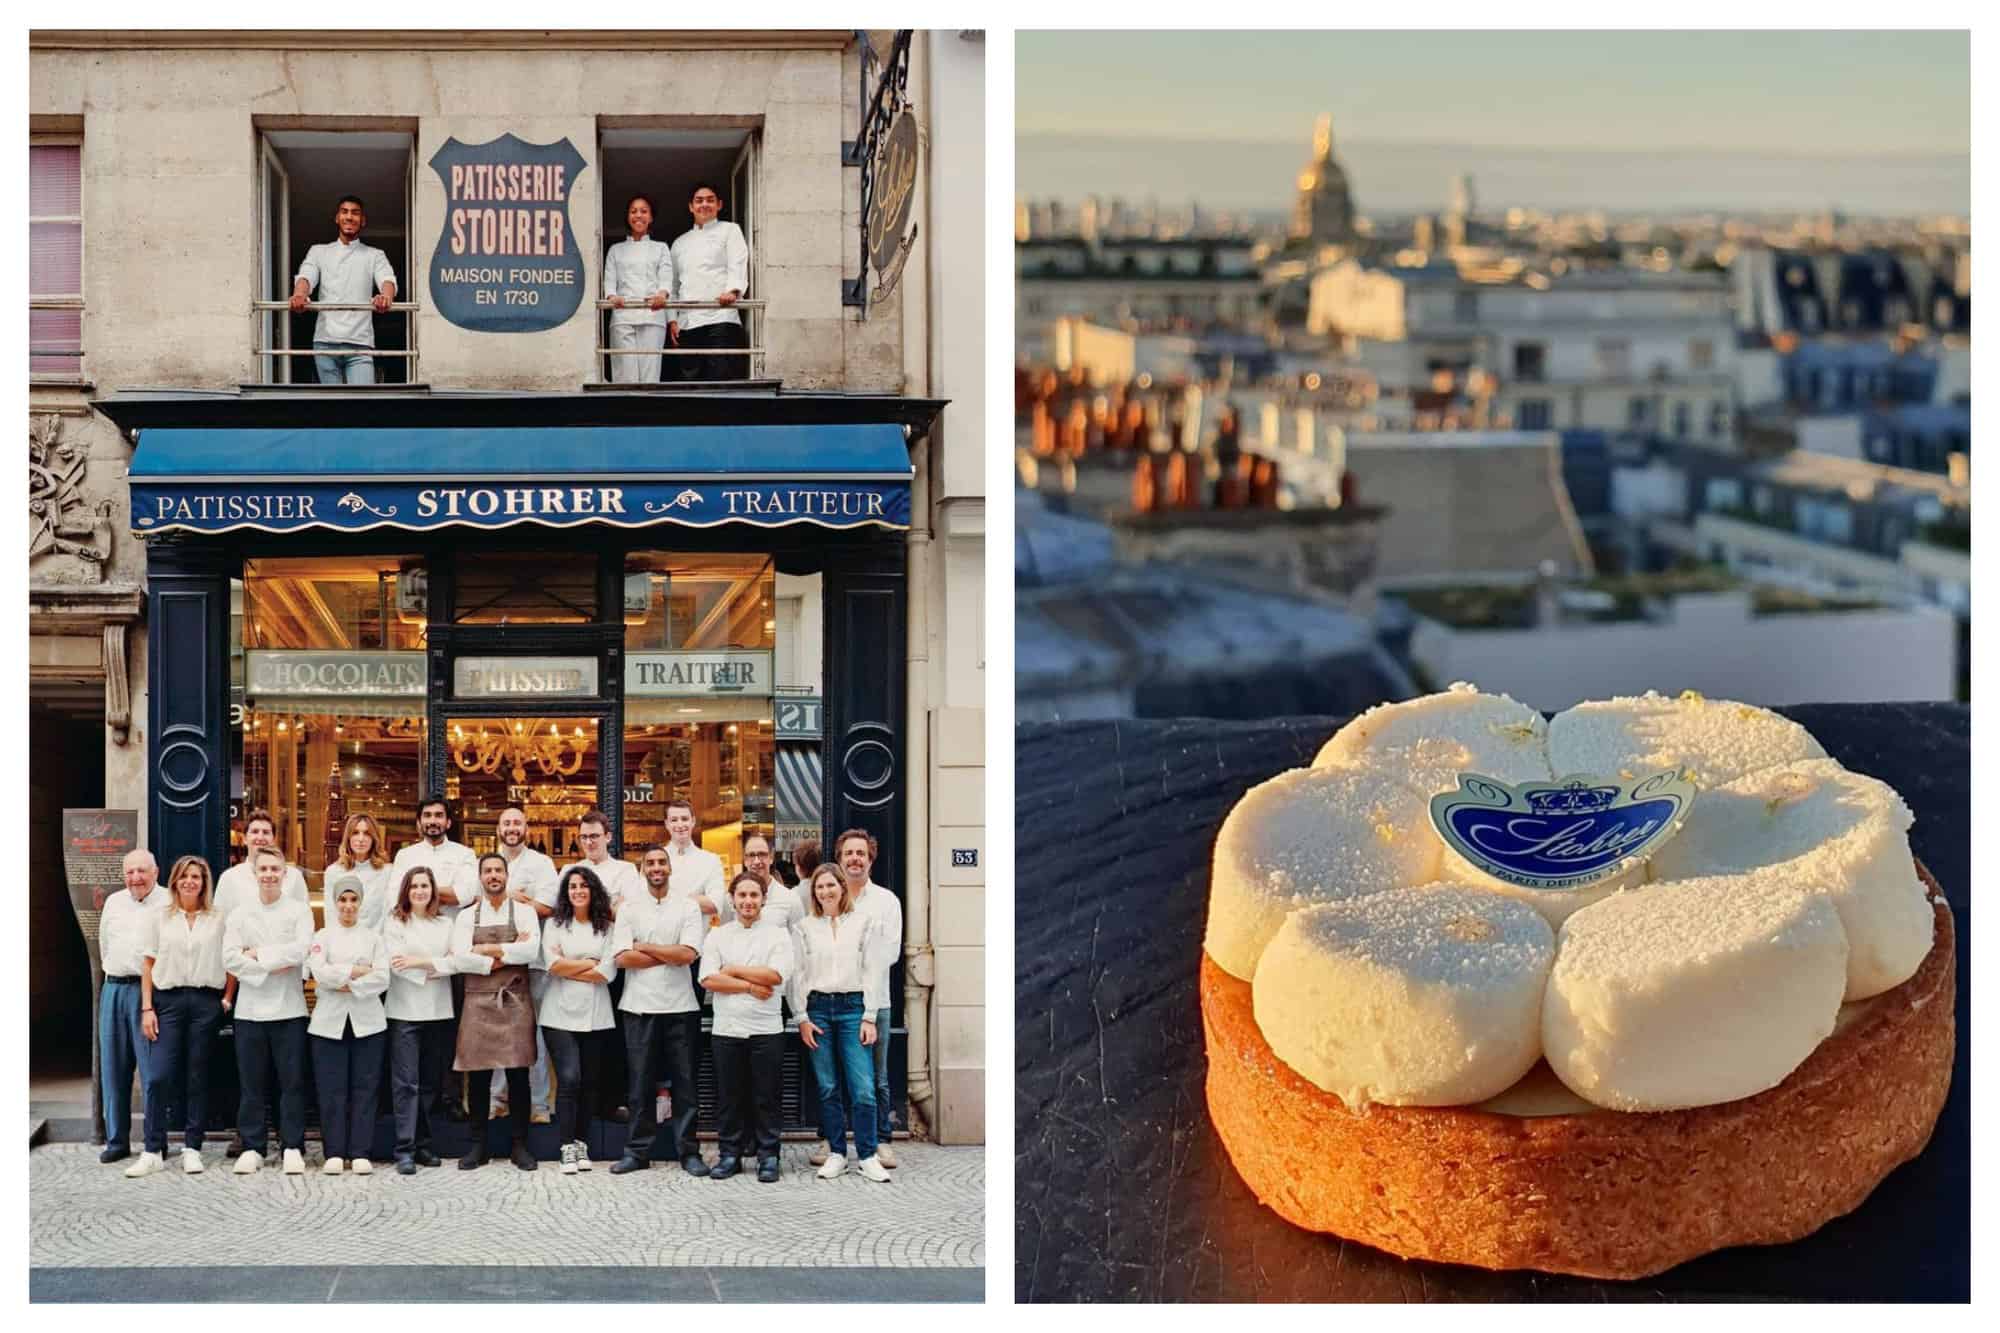 A montage of 2 pictures from Parisian Patisserie Sadaharu Aoki Paris. Left: The team (of 21 people) poses for the camera in front of the store. The store front reads as “Patisserie Stohrer Maison Fondée en 1730”. Right: Stohrer’s famous Tarte au Citron, a tart in a brown crust and flower shaped white filling, pictured with the backgrounds of the Parisian skyline.